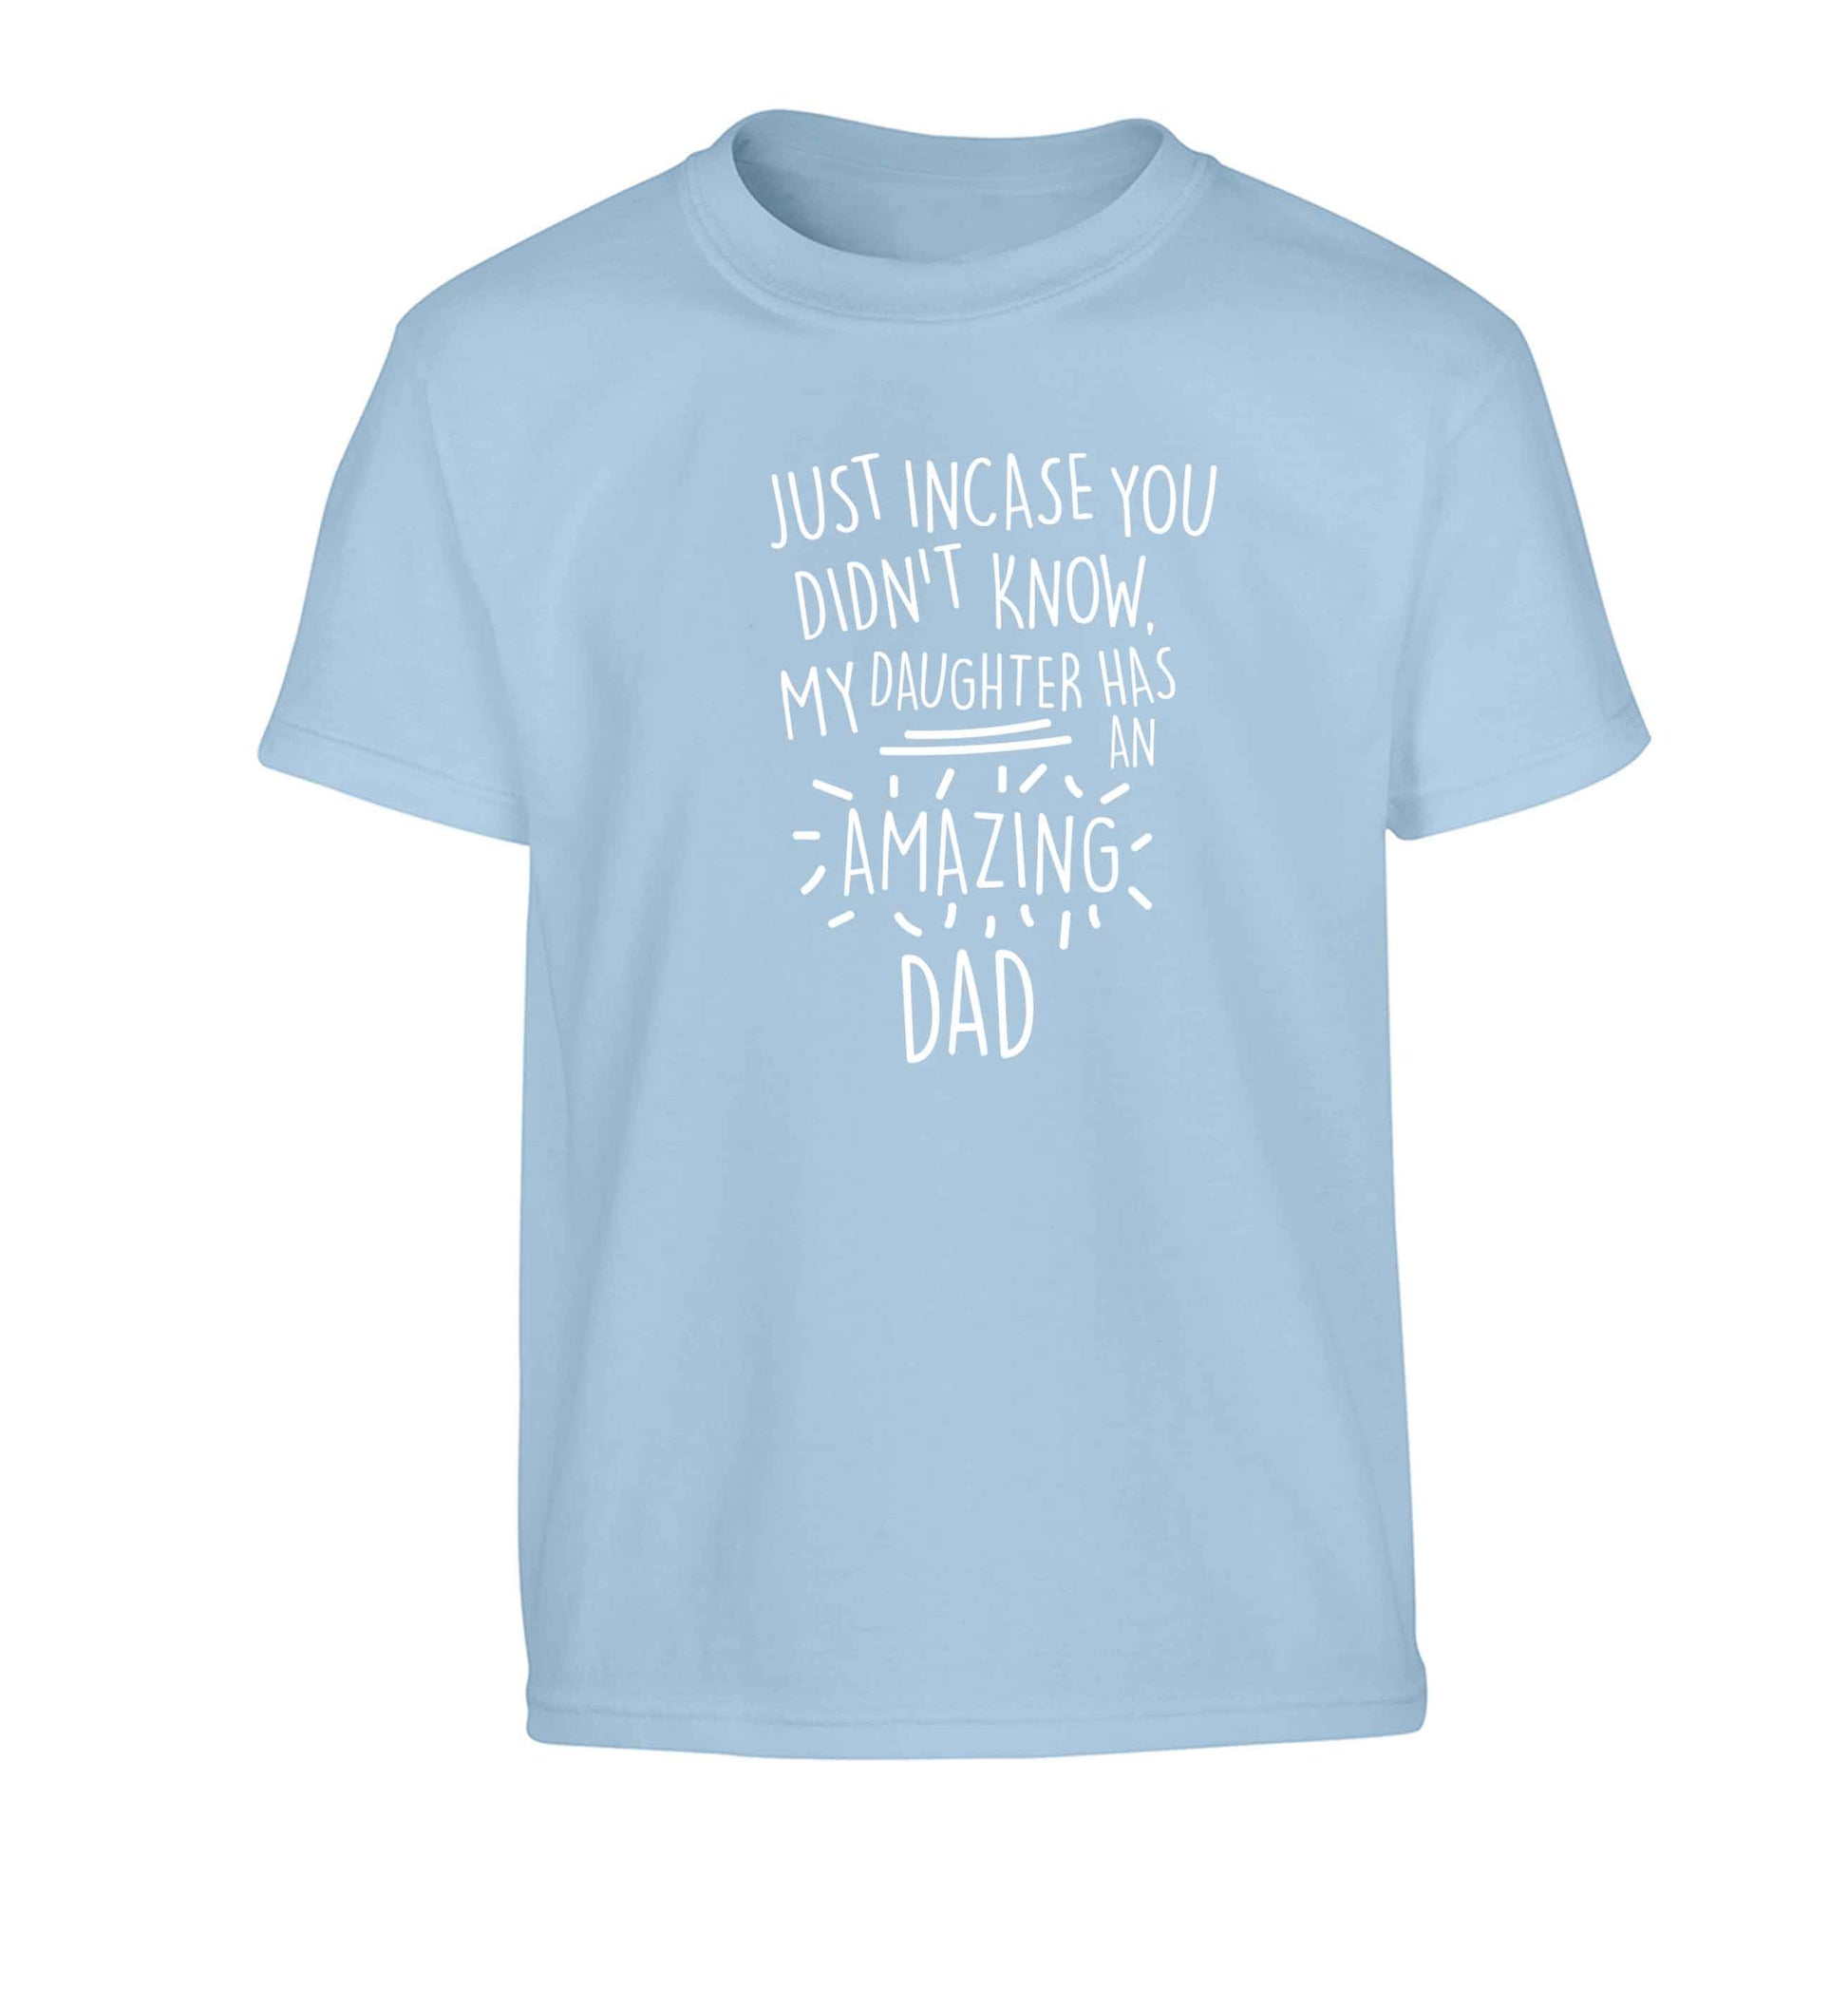 Just incase you didn't know my daughter has an amazing dad Children's light blue Tshirt 12-13 Years